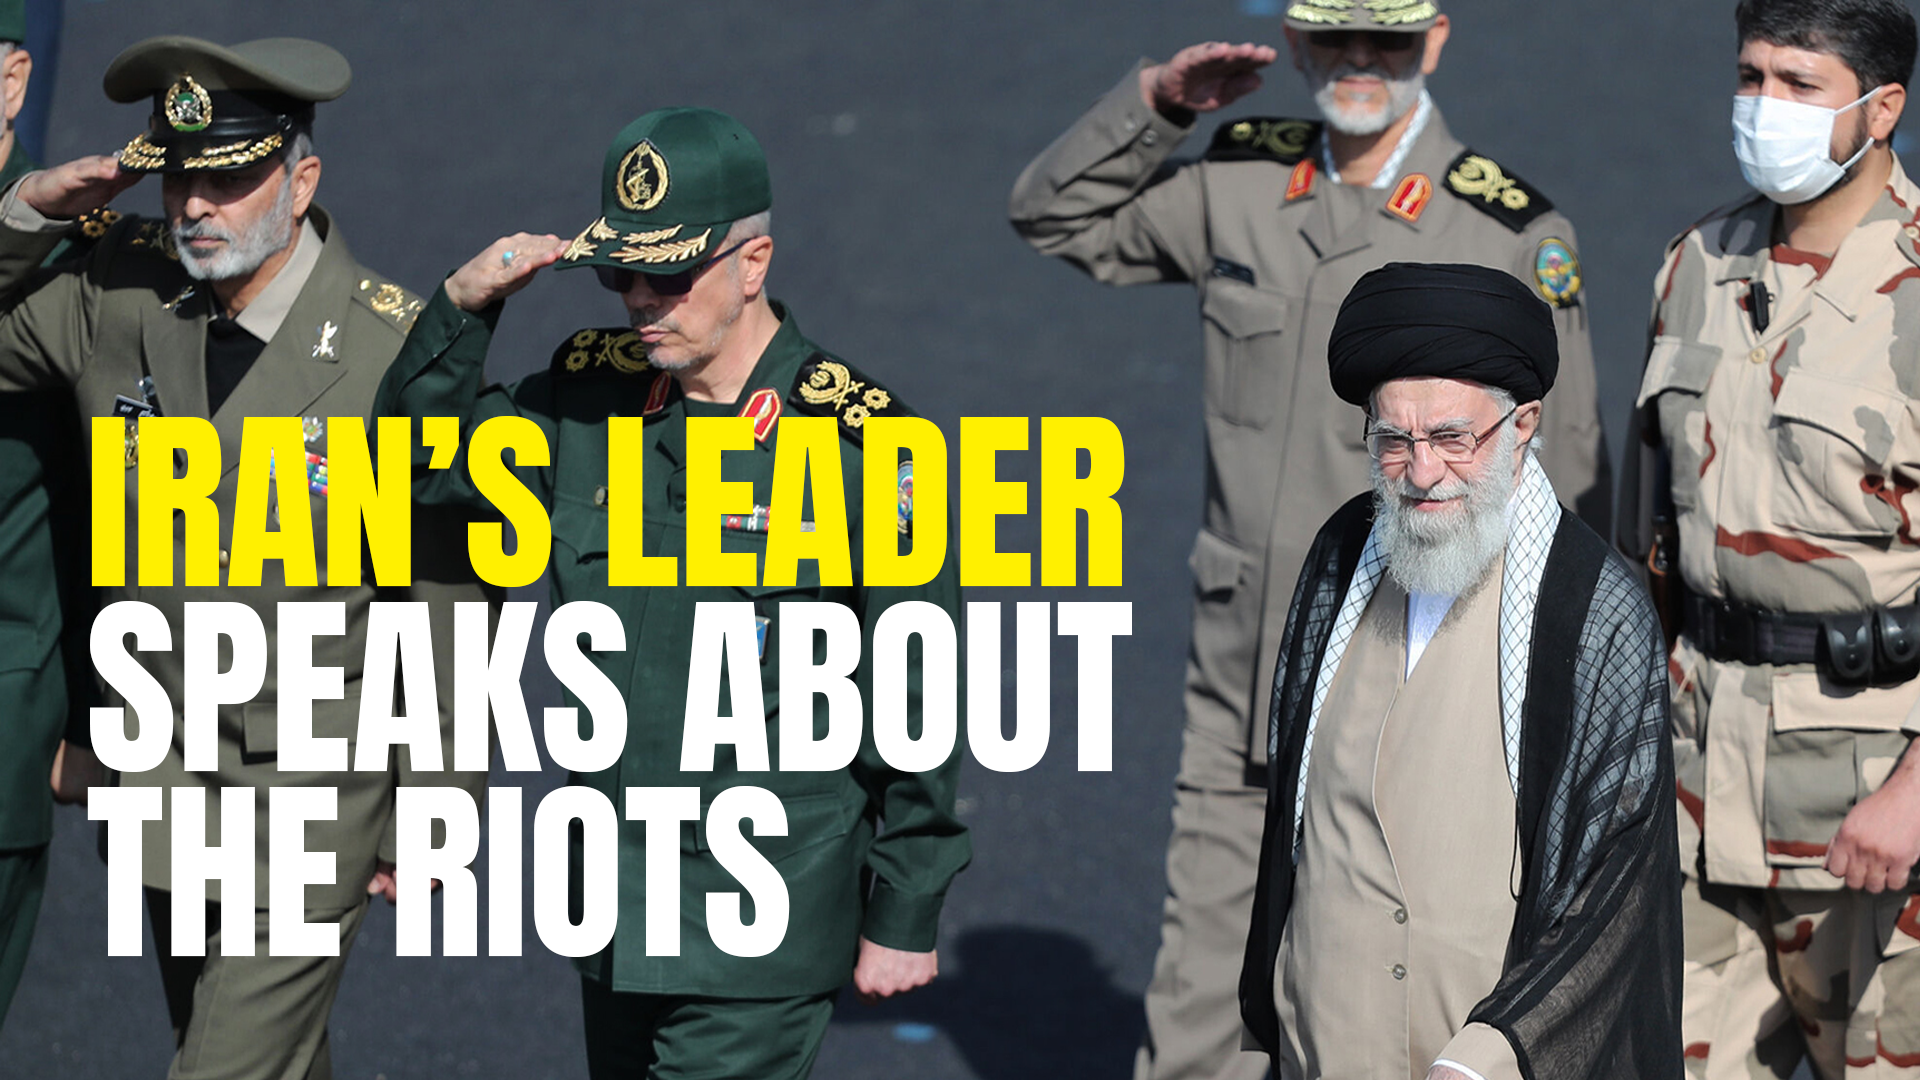 The Leader of Iran’s Islamic Revolution speaks about the riots